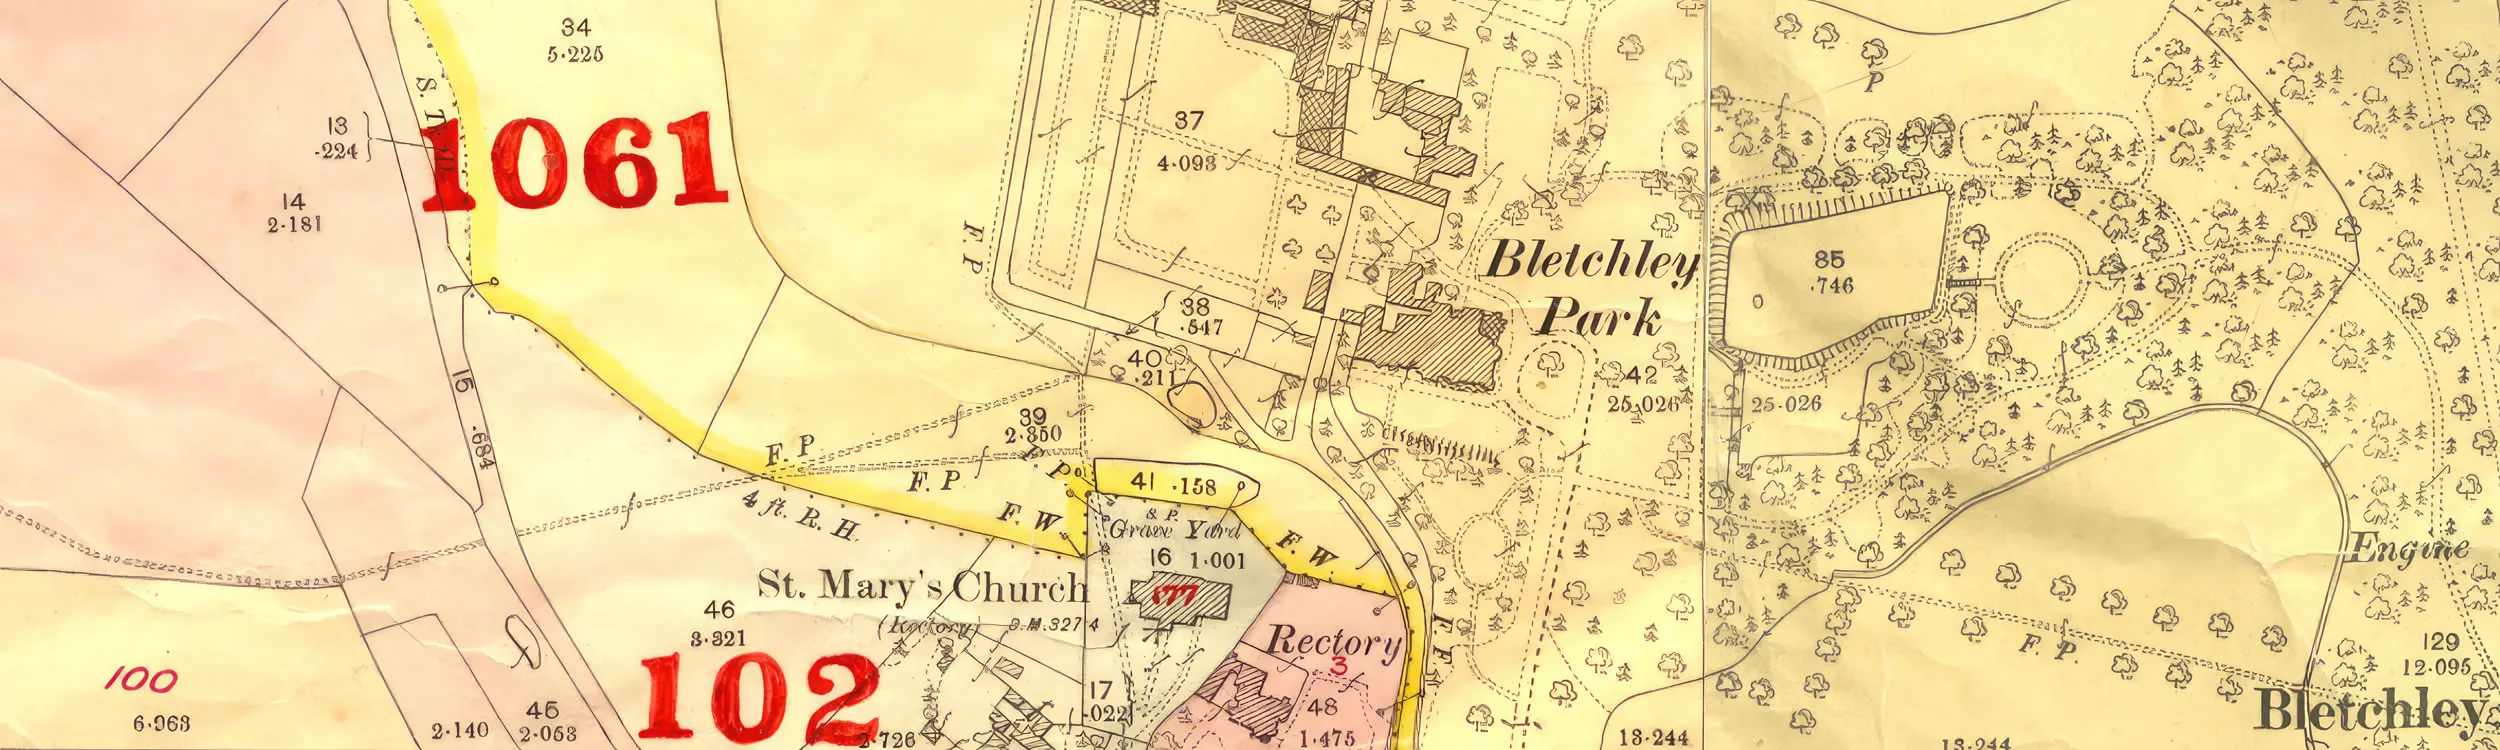 North Buckinghamshire Maps reveal Bletchley Park